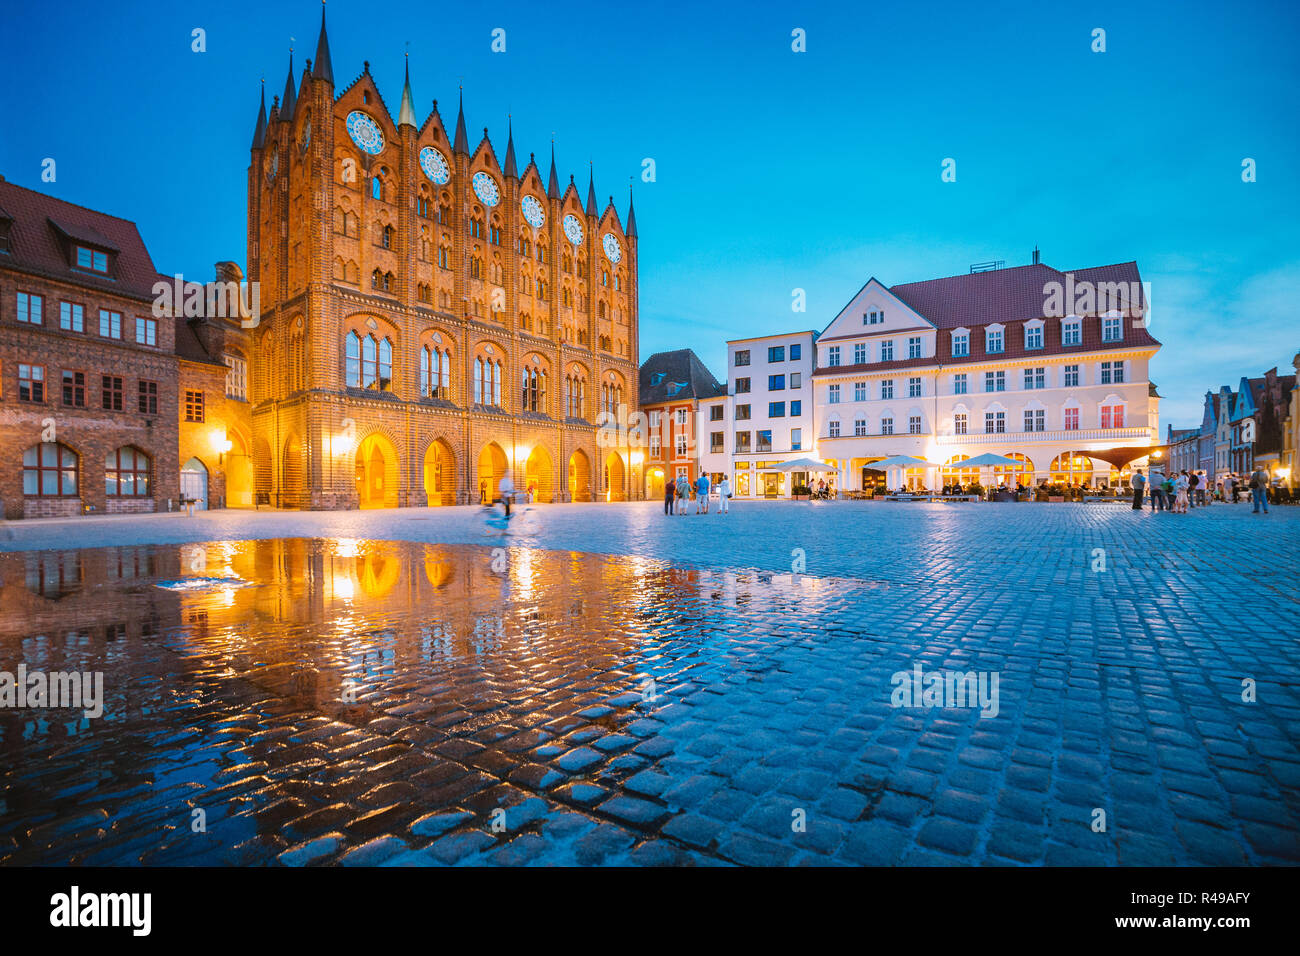 Classic twilight view of the hanseatic town of Stralsund during blue hour at dusk, Mecklenburg-Vorpommern, Germany Stock Photo